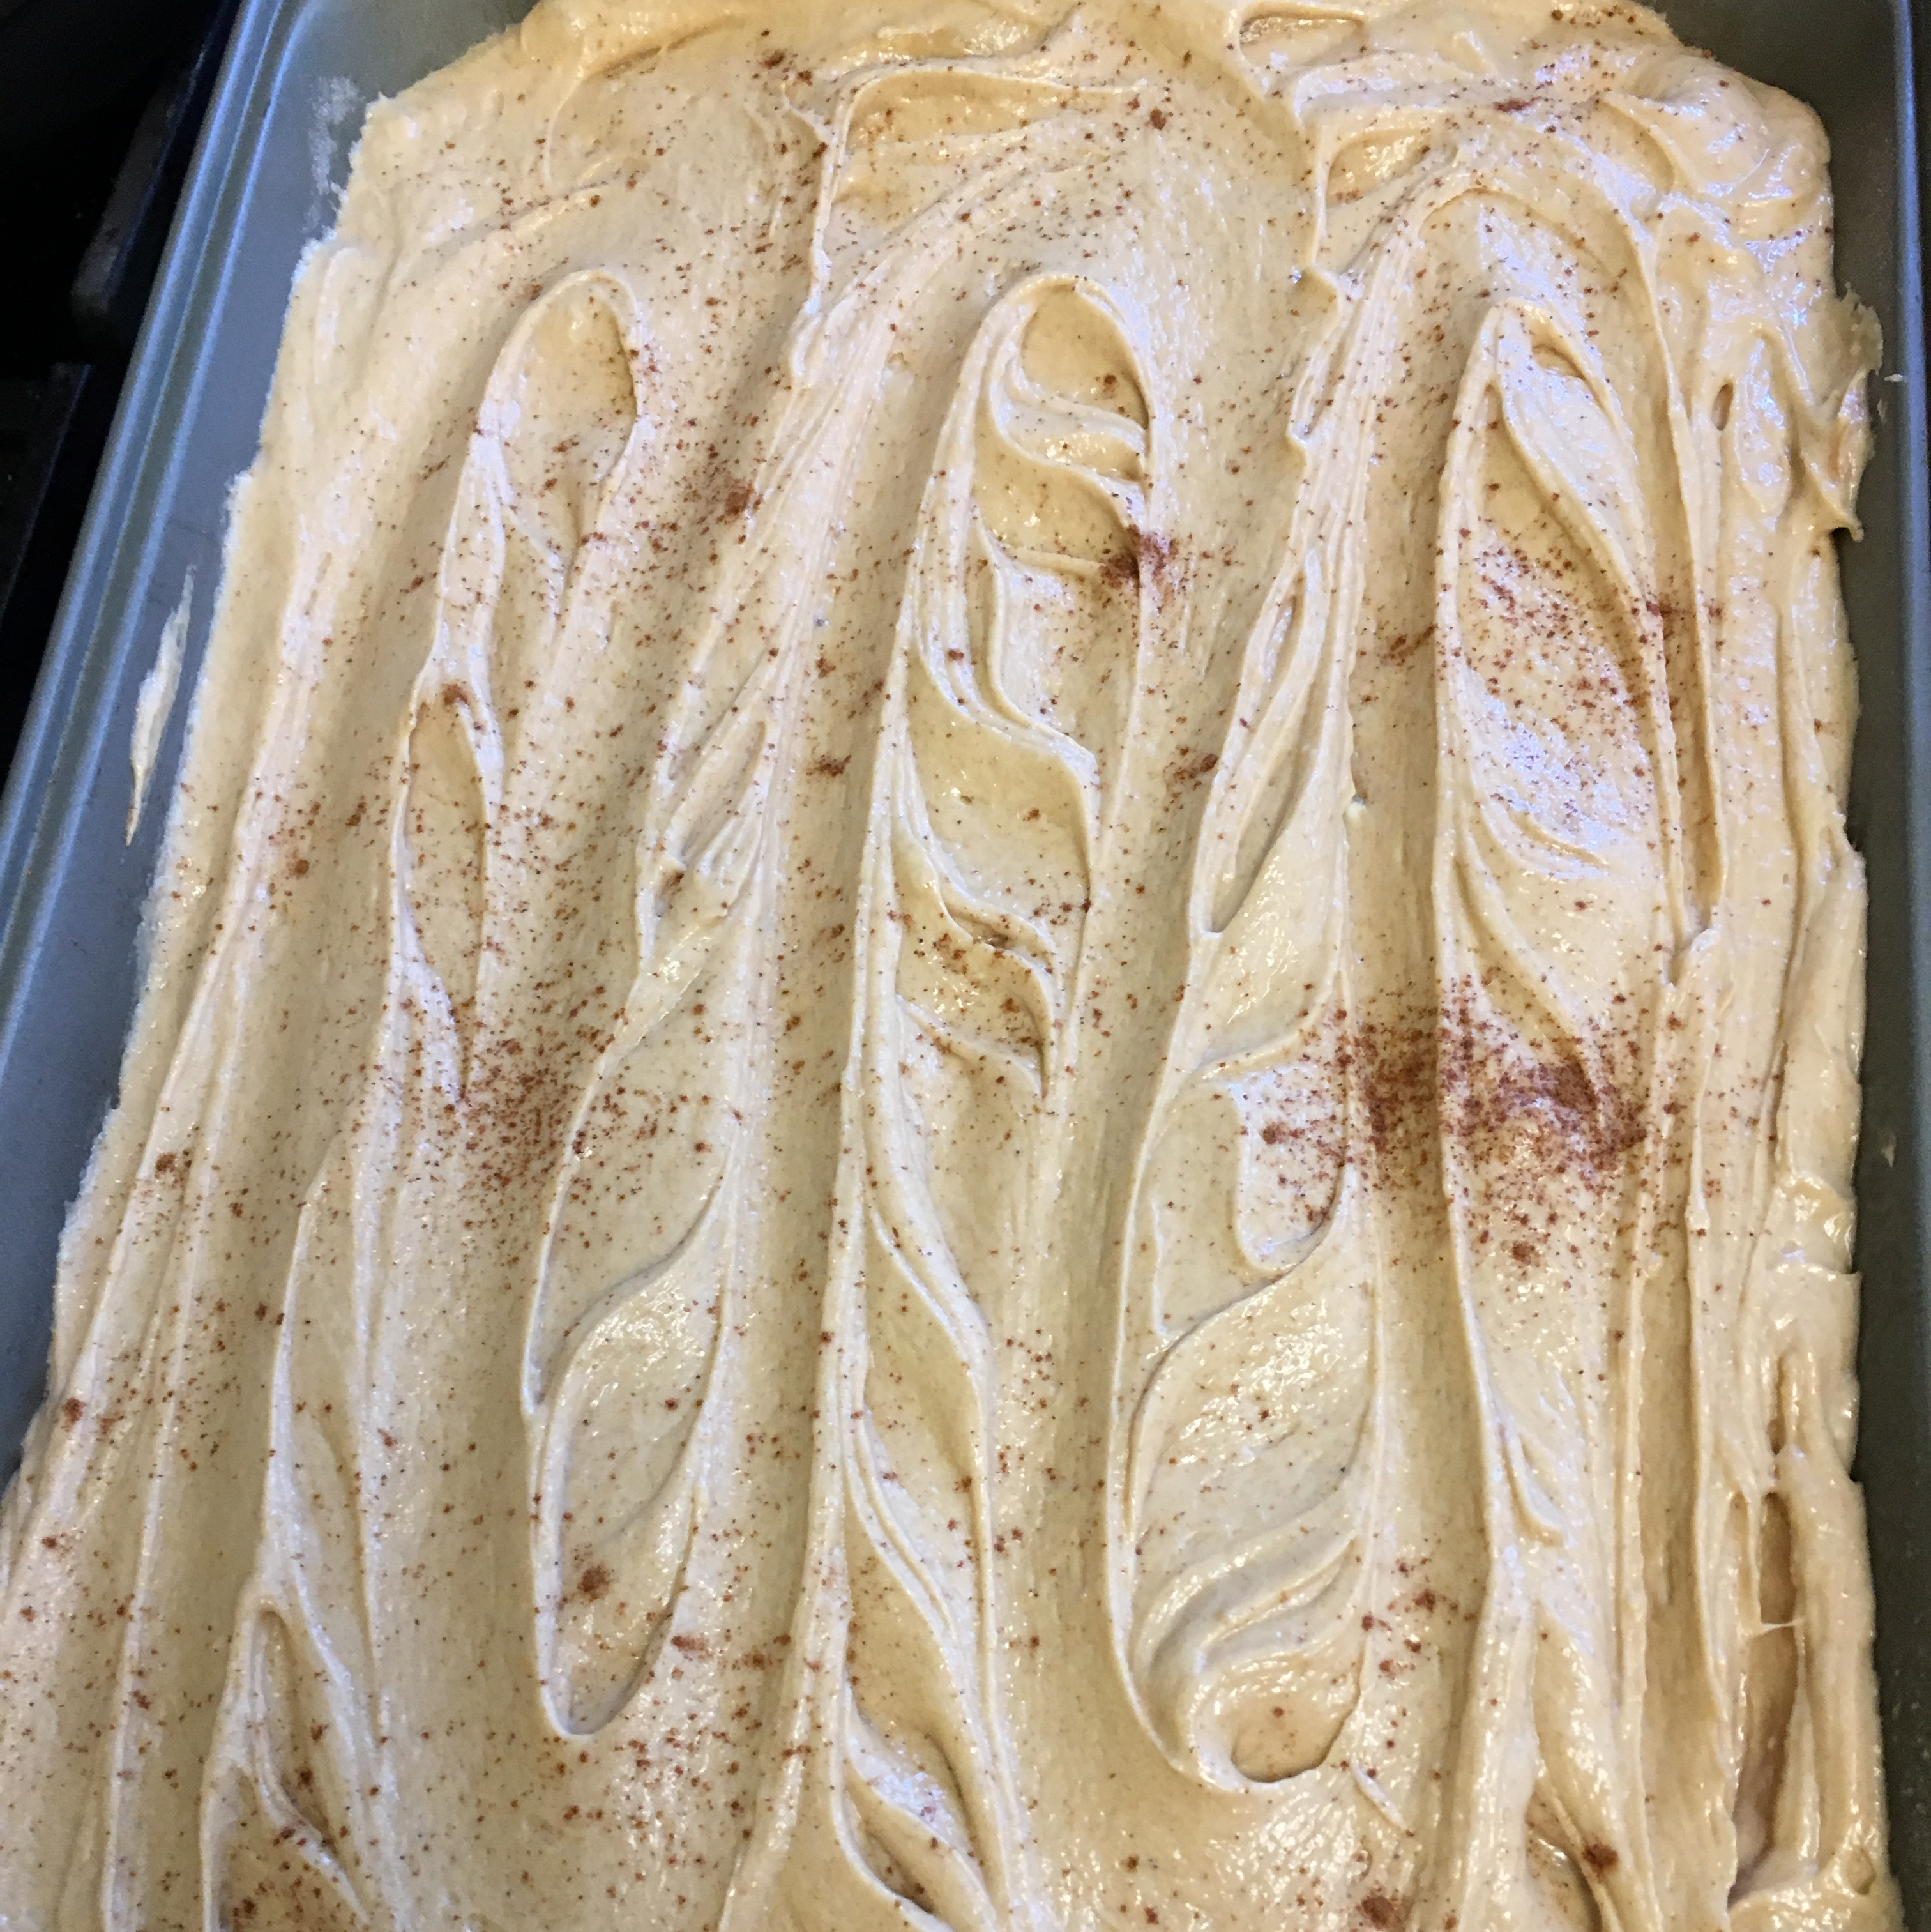 Cream Cheese Peanut Butter Frosting 